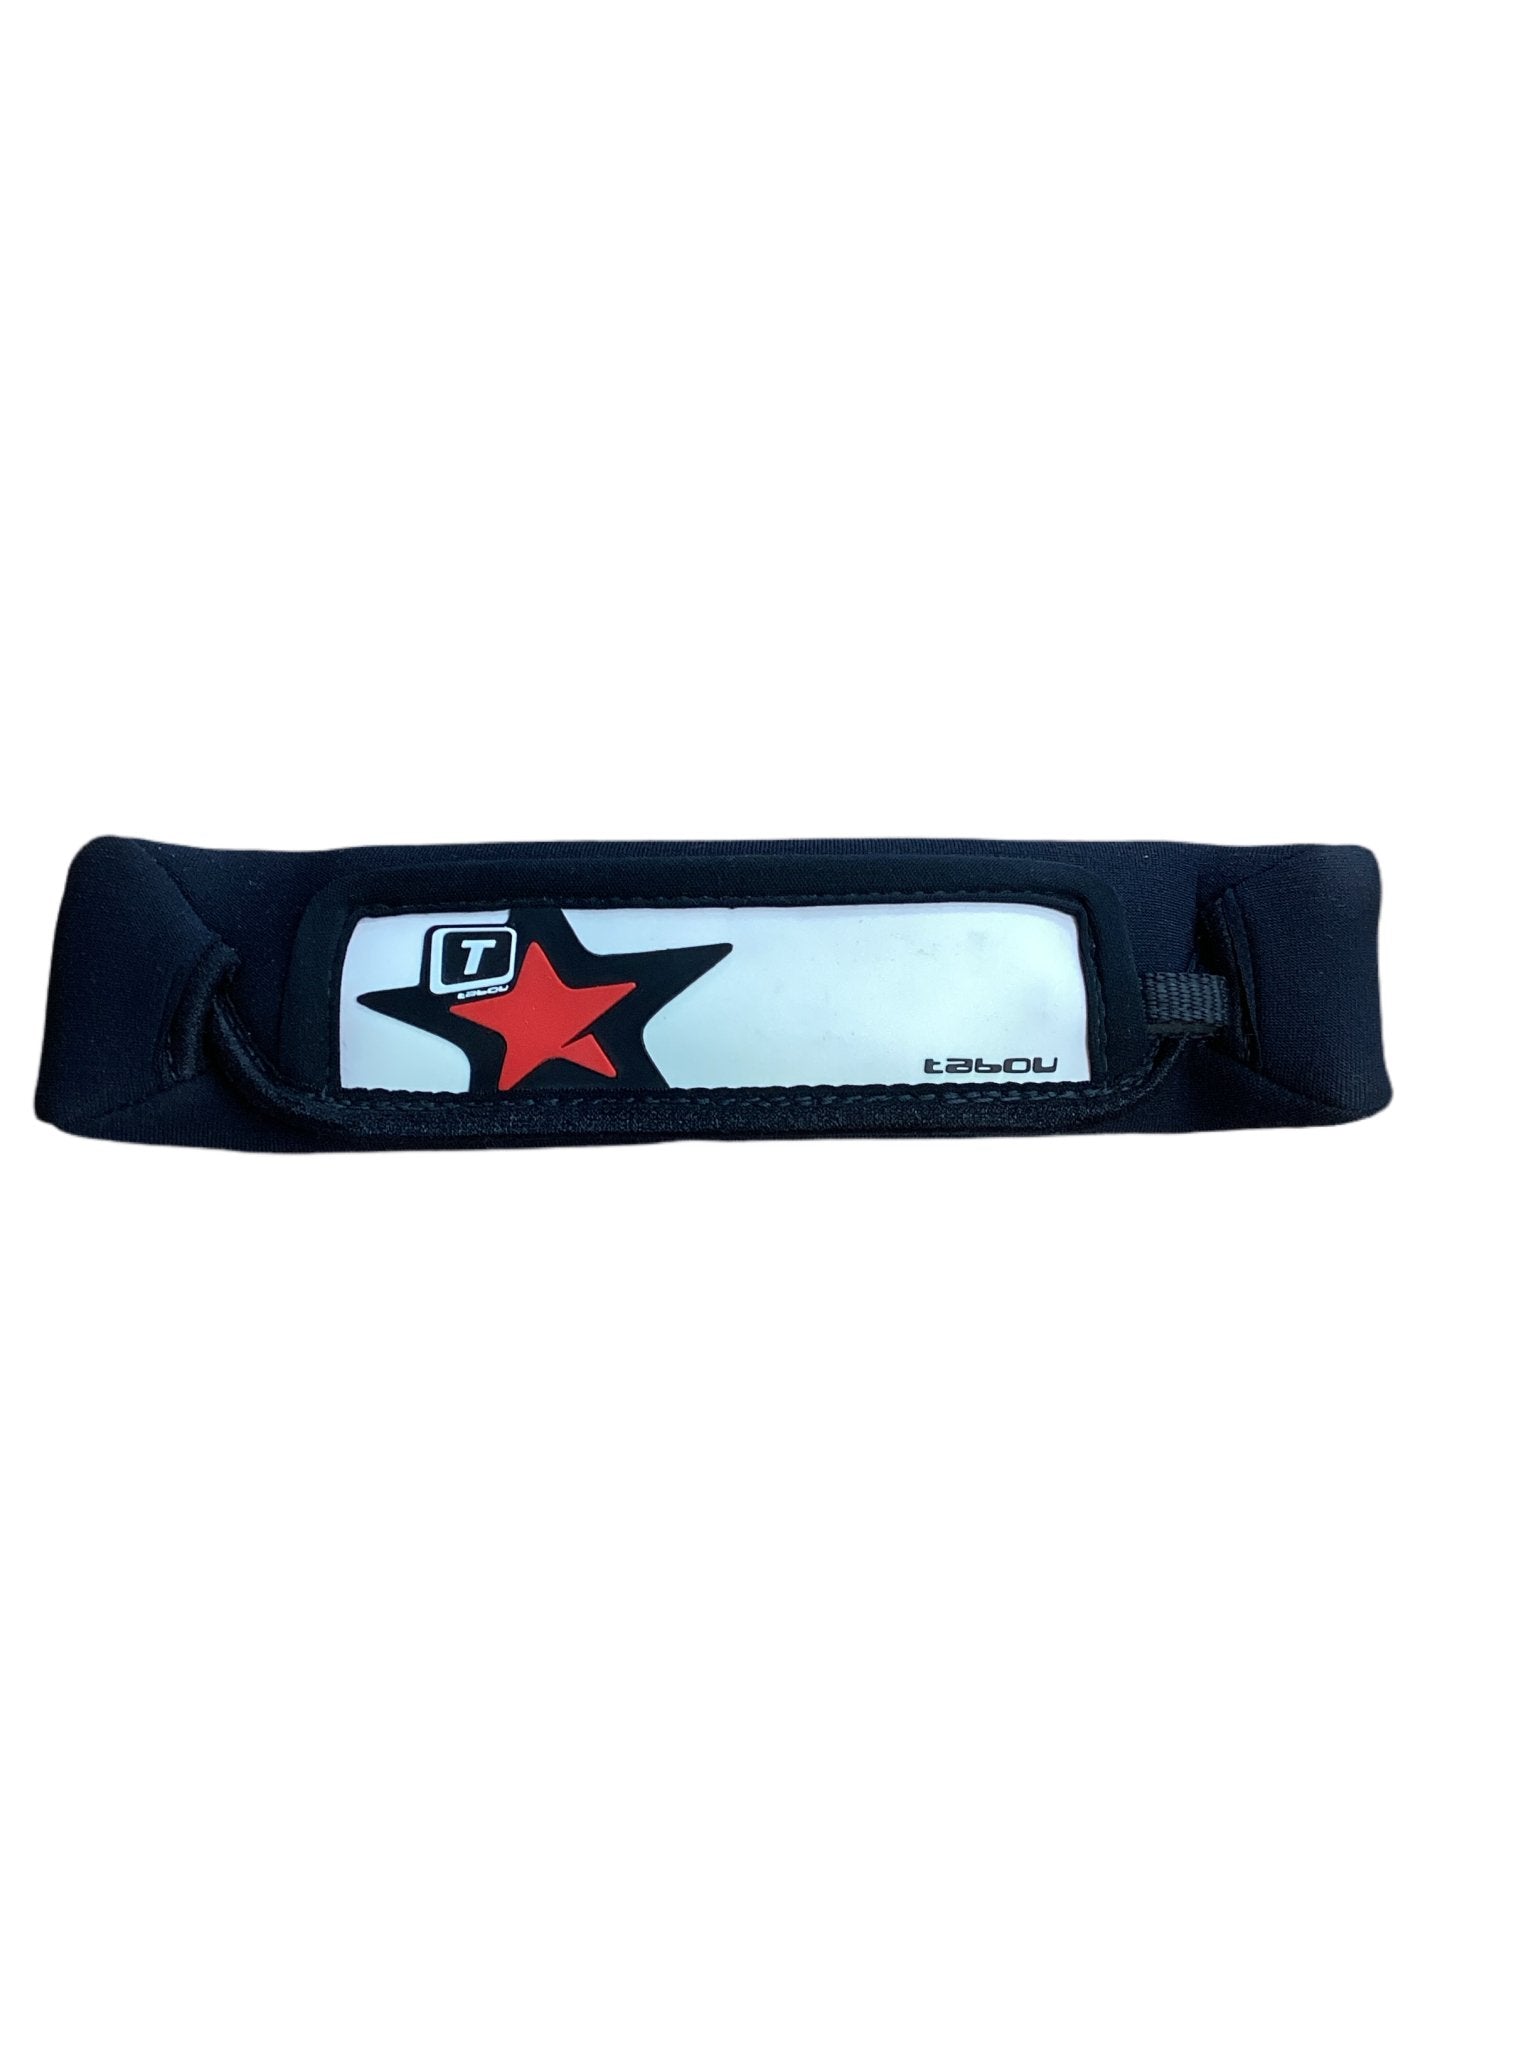 Tabou Windsurfing Footstrap - Worthing Watersports - 79272330896694 - Accessories - Tabou